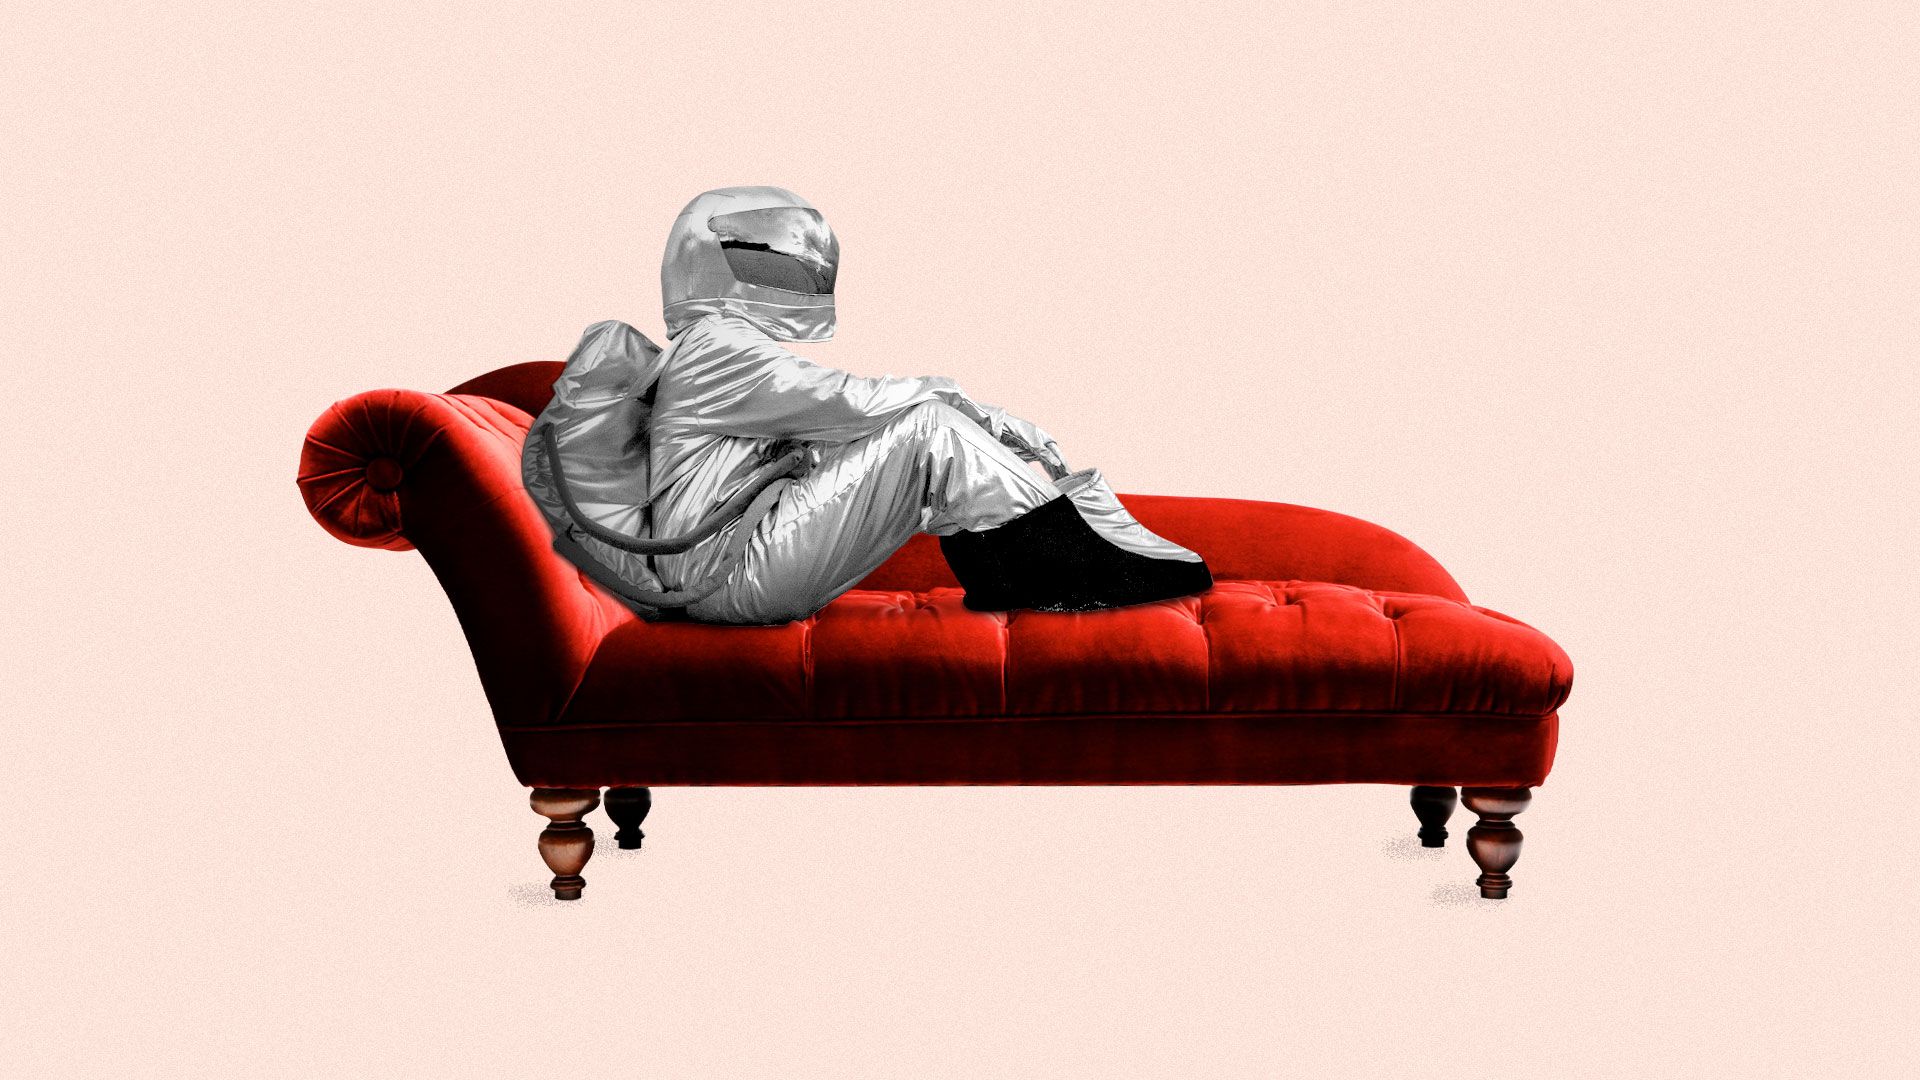 Illustration of an astronaut seated on a therapist couch.